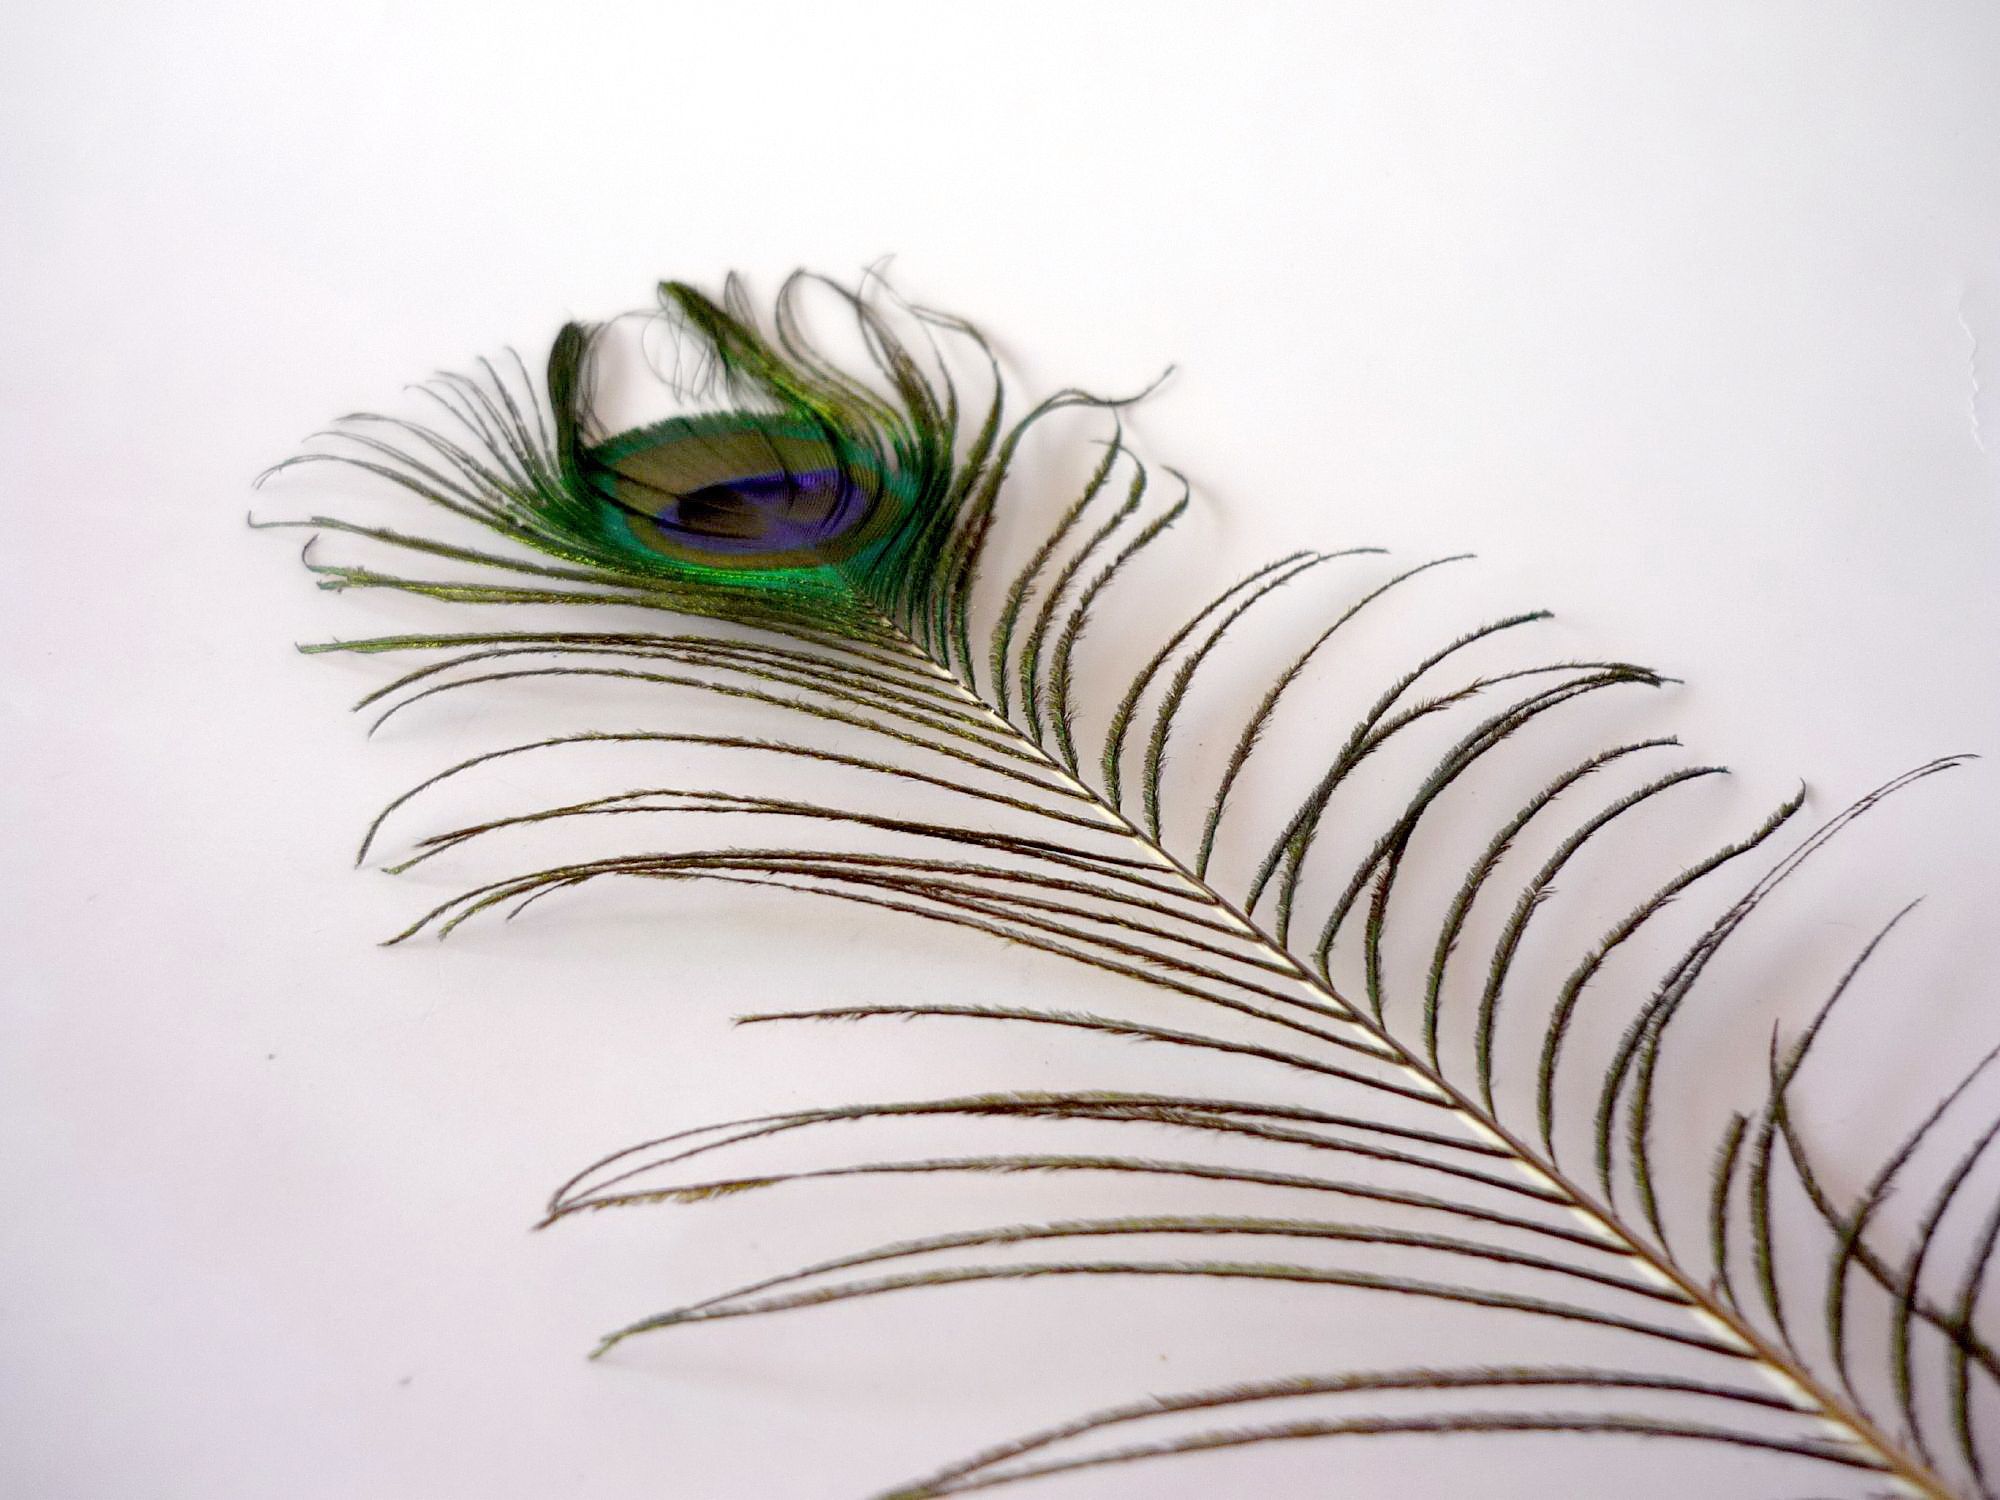 Peacock feather photo